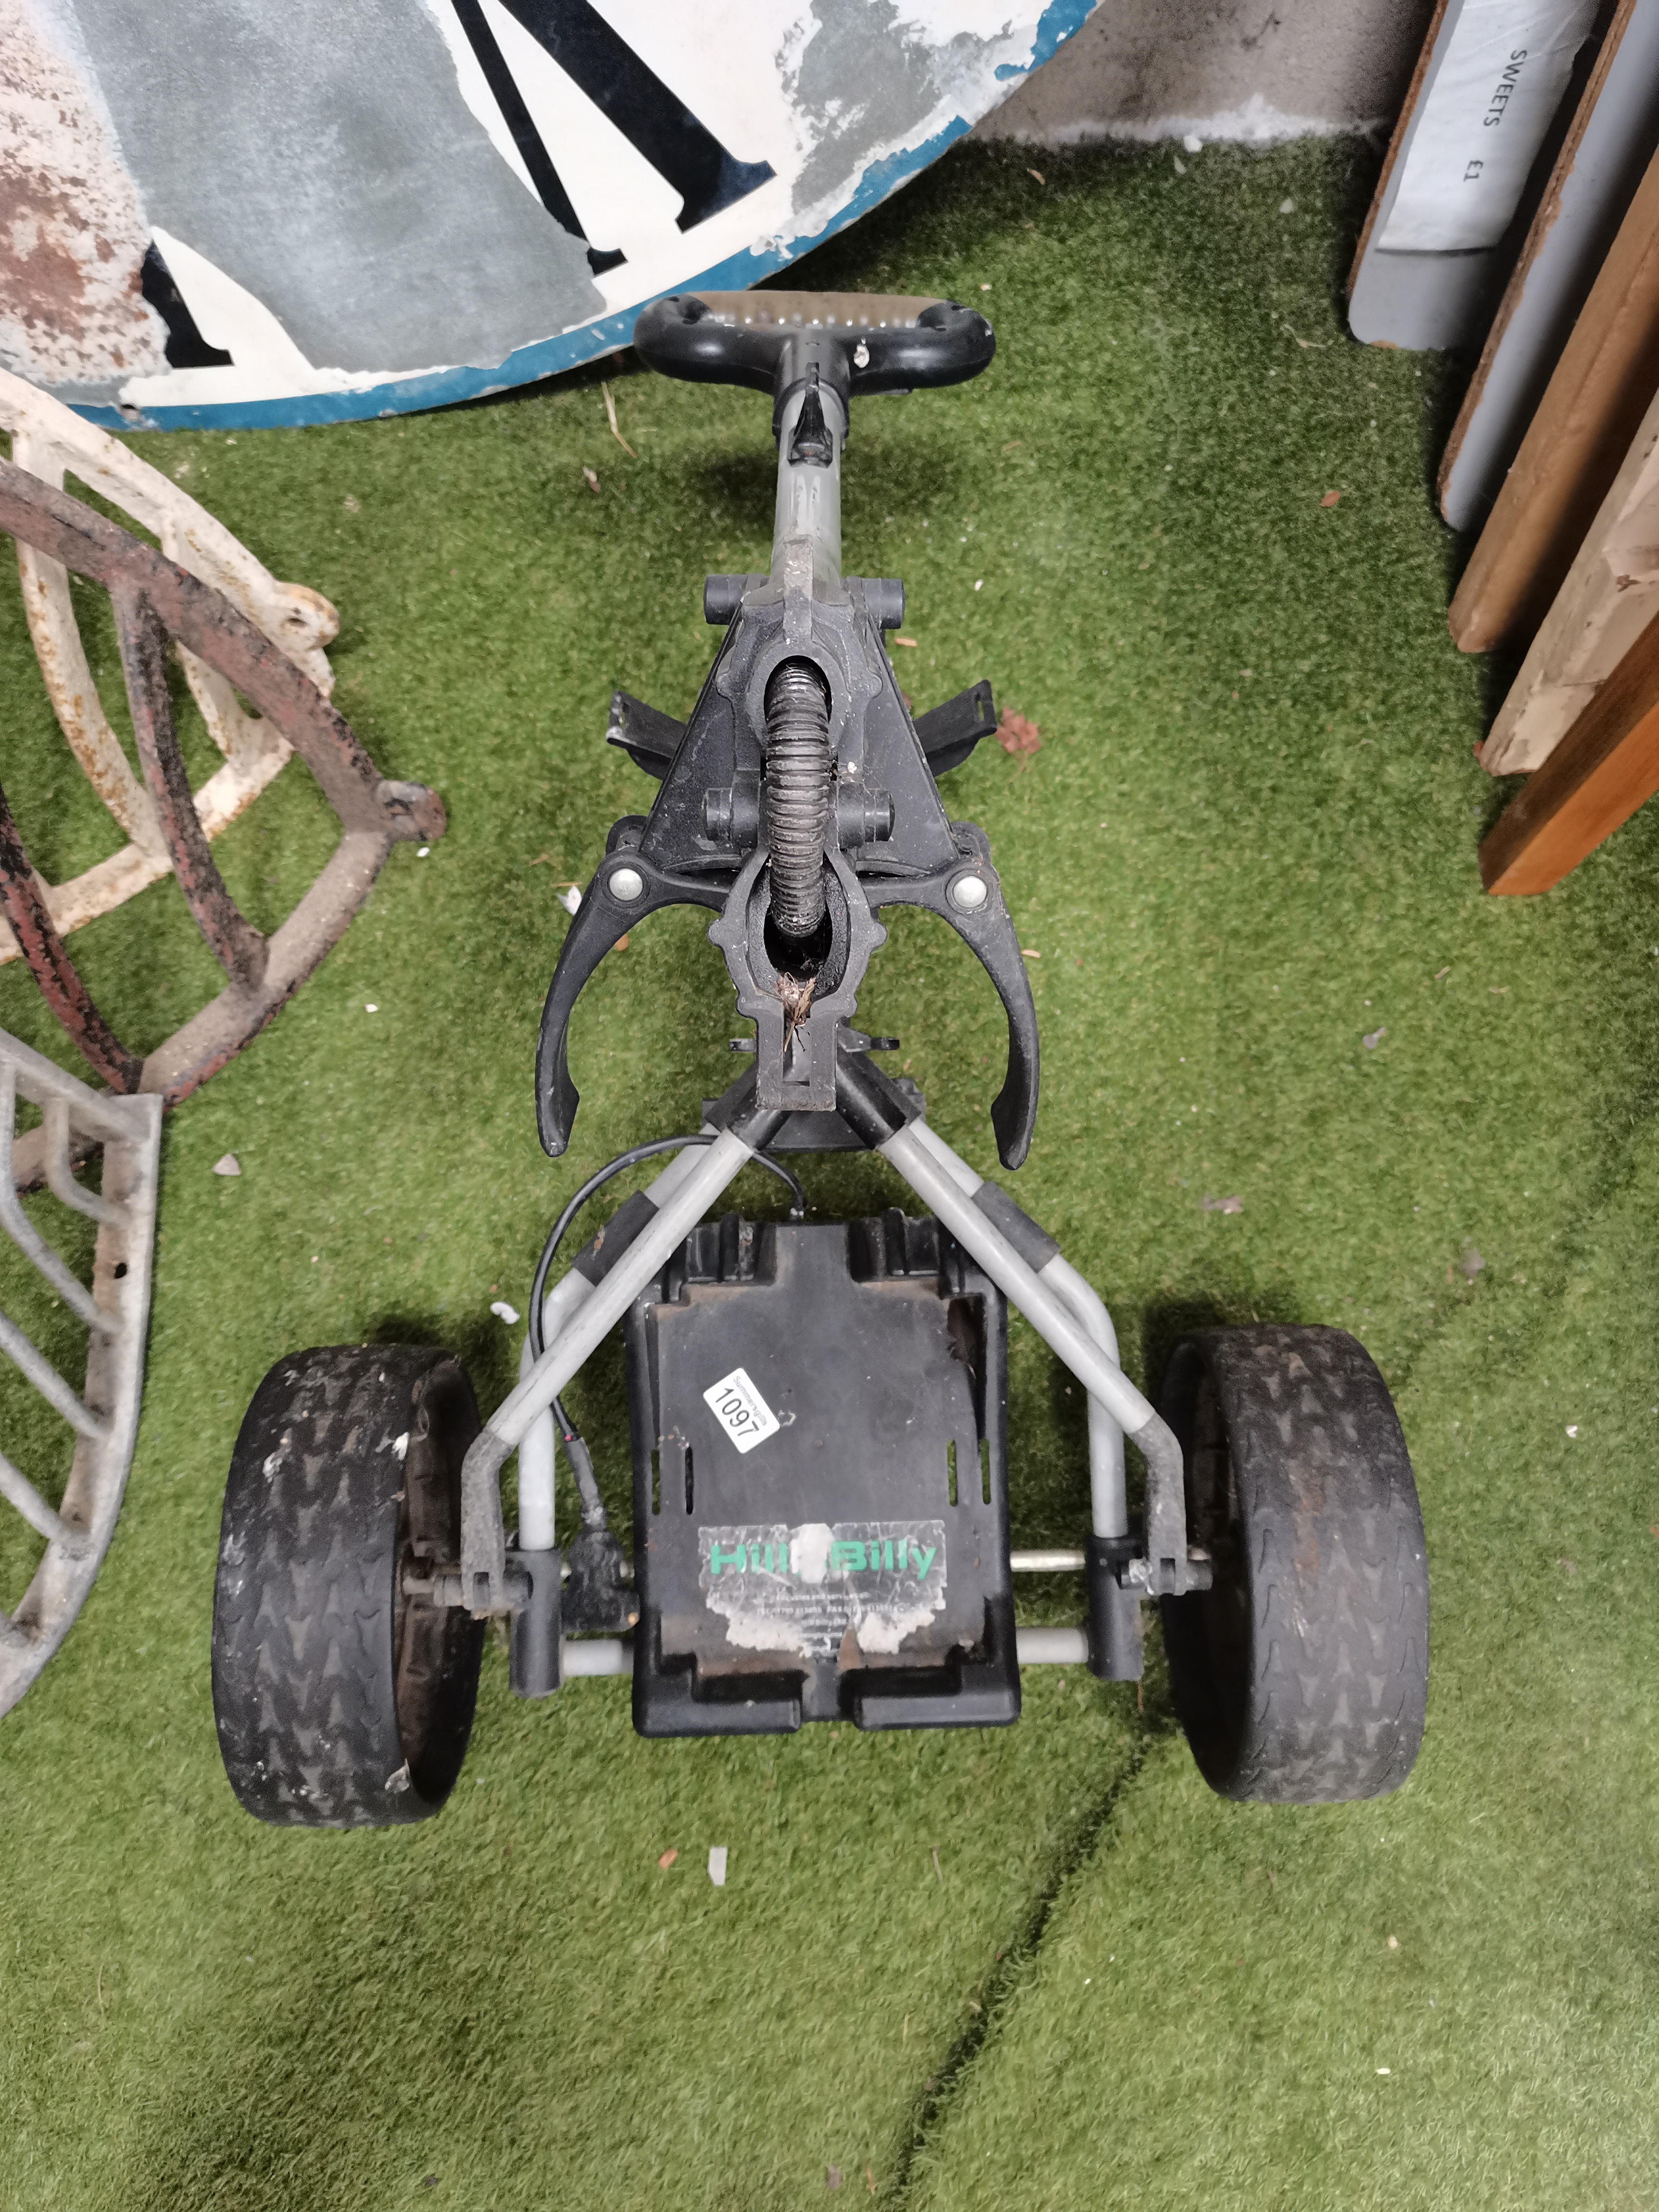 Golf trolley electric but no battery